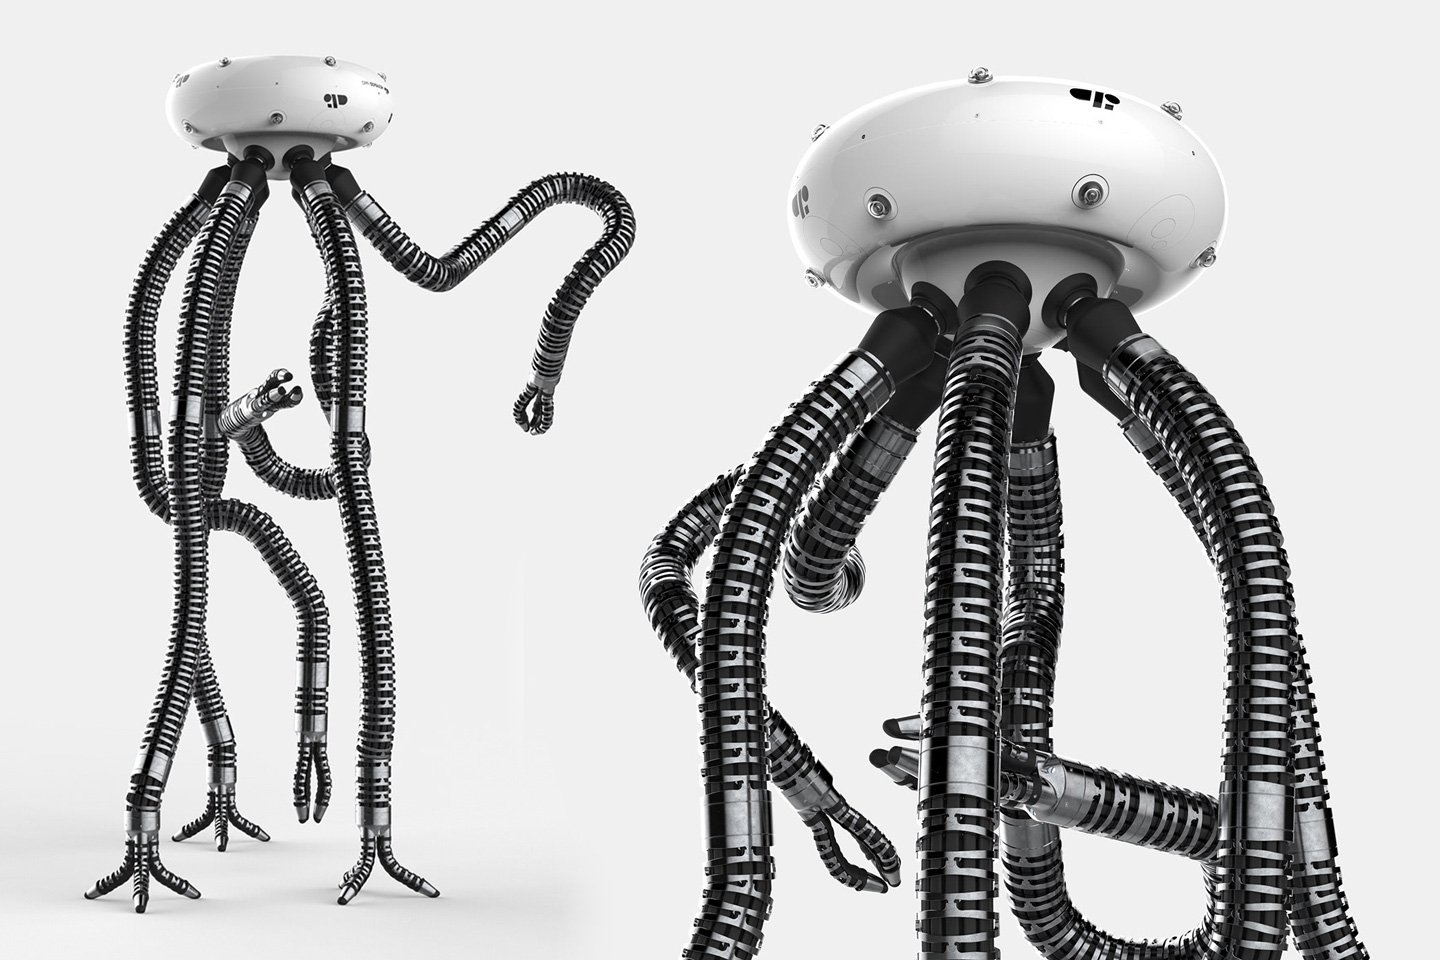 No, Doctor Octopus doesn’t have a minion drone. The Hexapod is a ‘non-evil’ robot that harvests fruits.